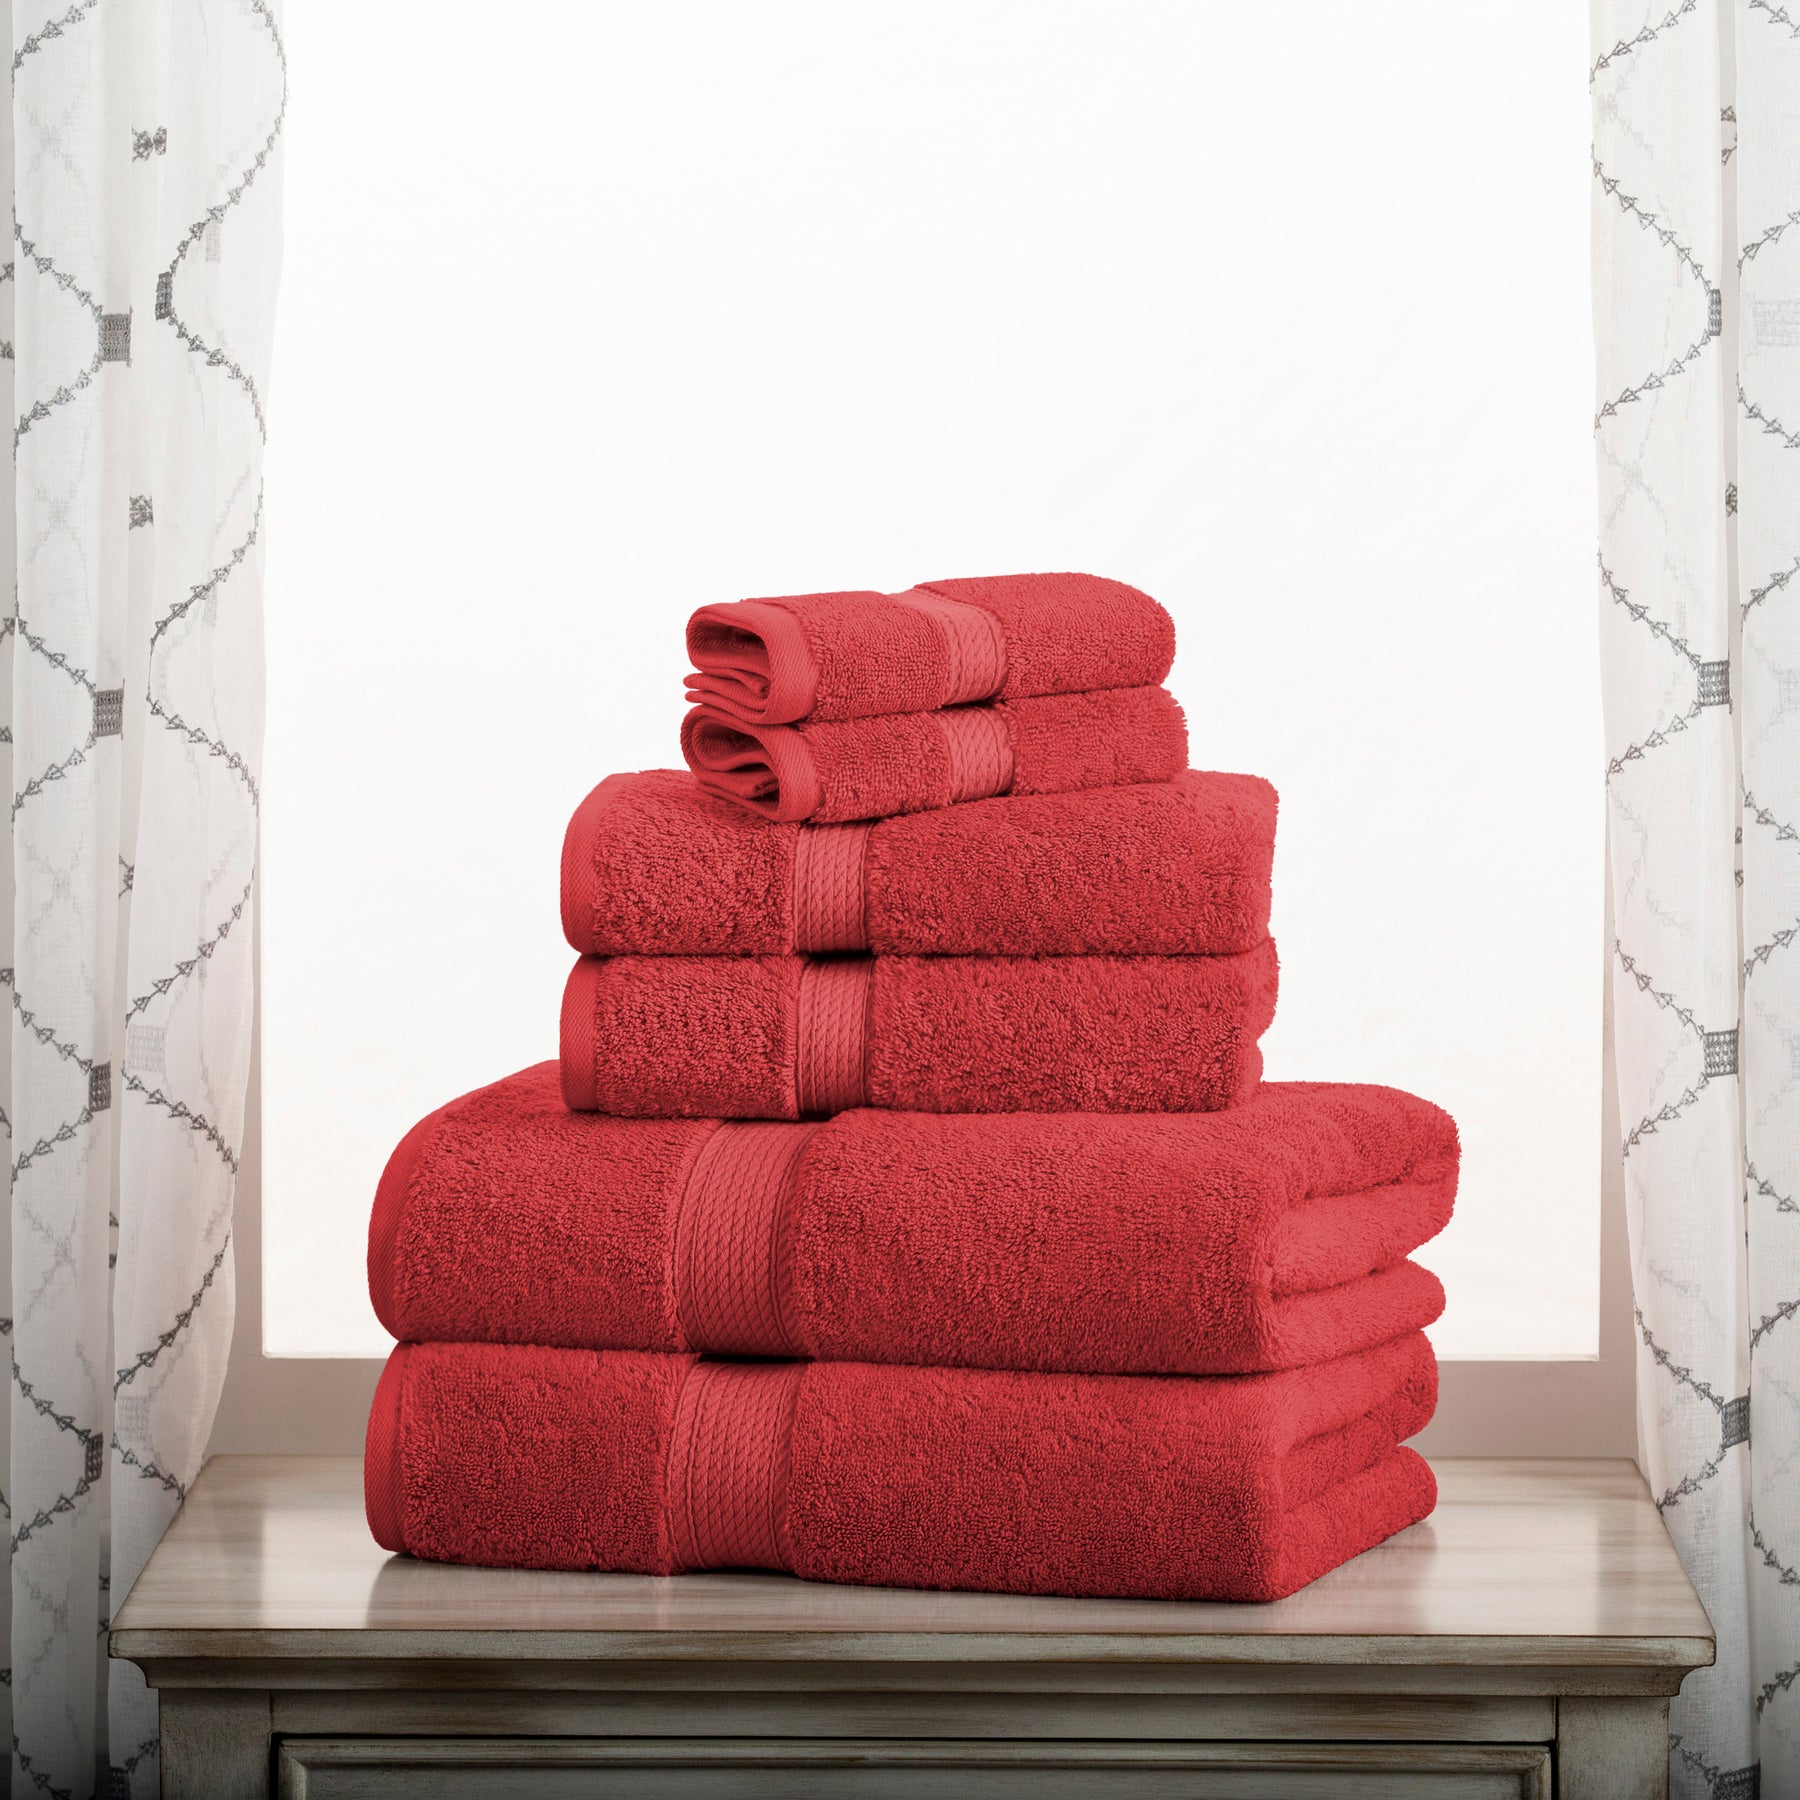 Cotton Assorted Bath Hand Face Towel Set by Superior 6 Pack